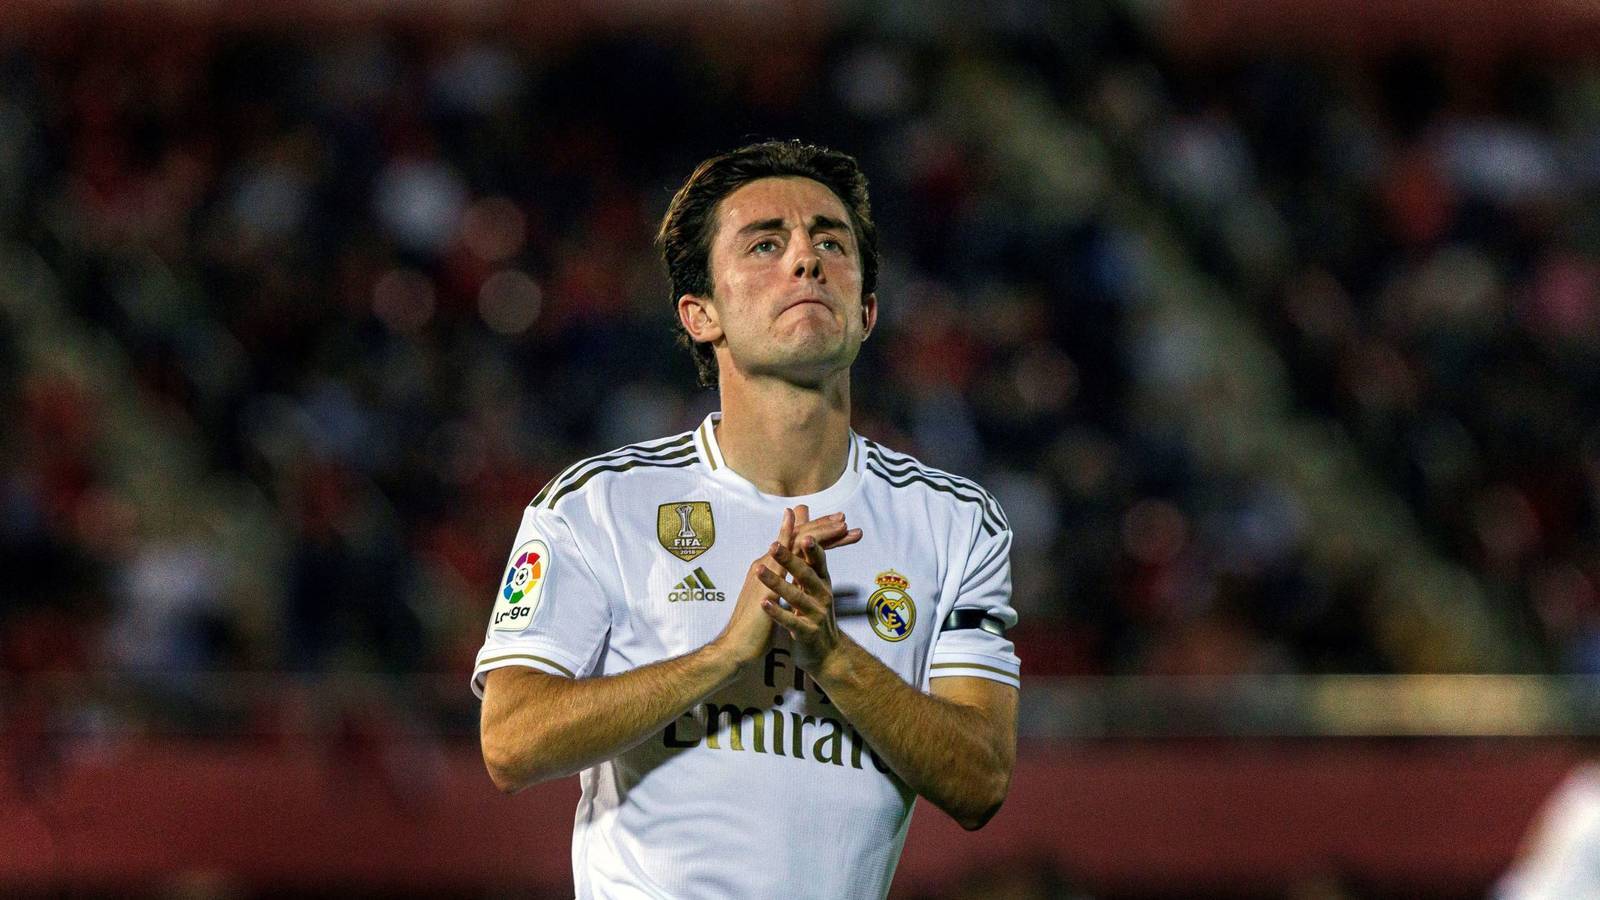 Odriozola Plays 3 Matches for Real and 4 for Bayern to Win Two Titles